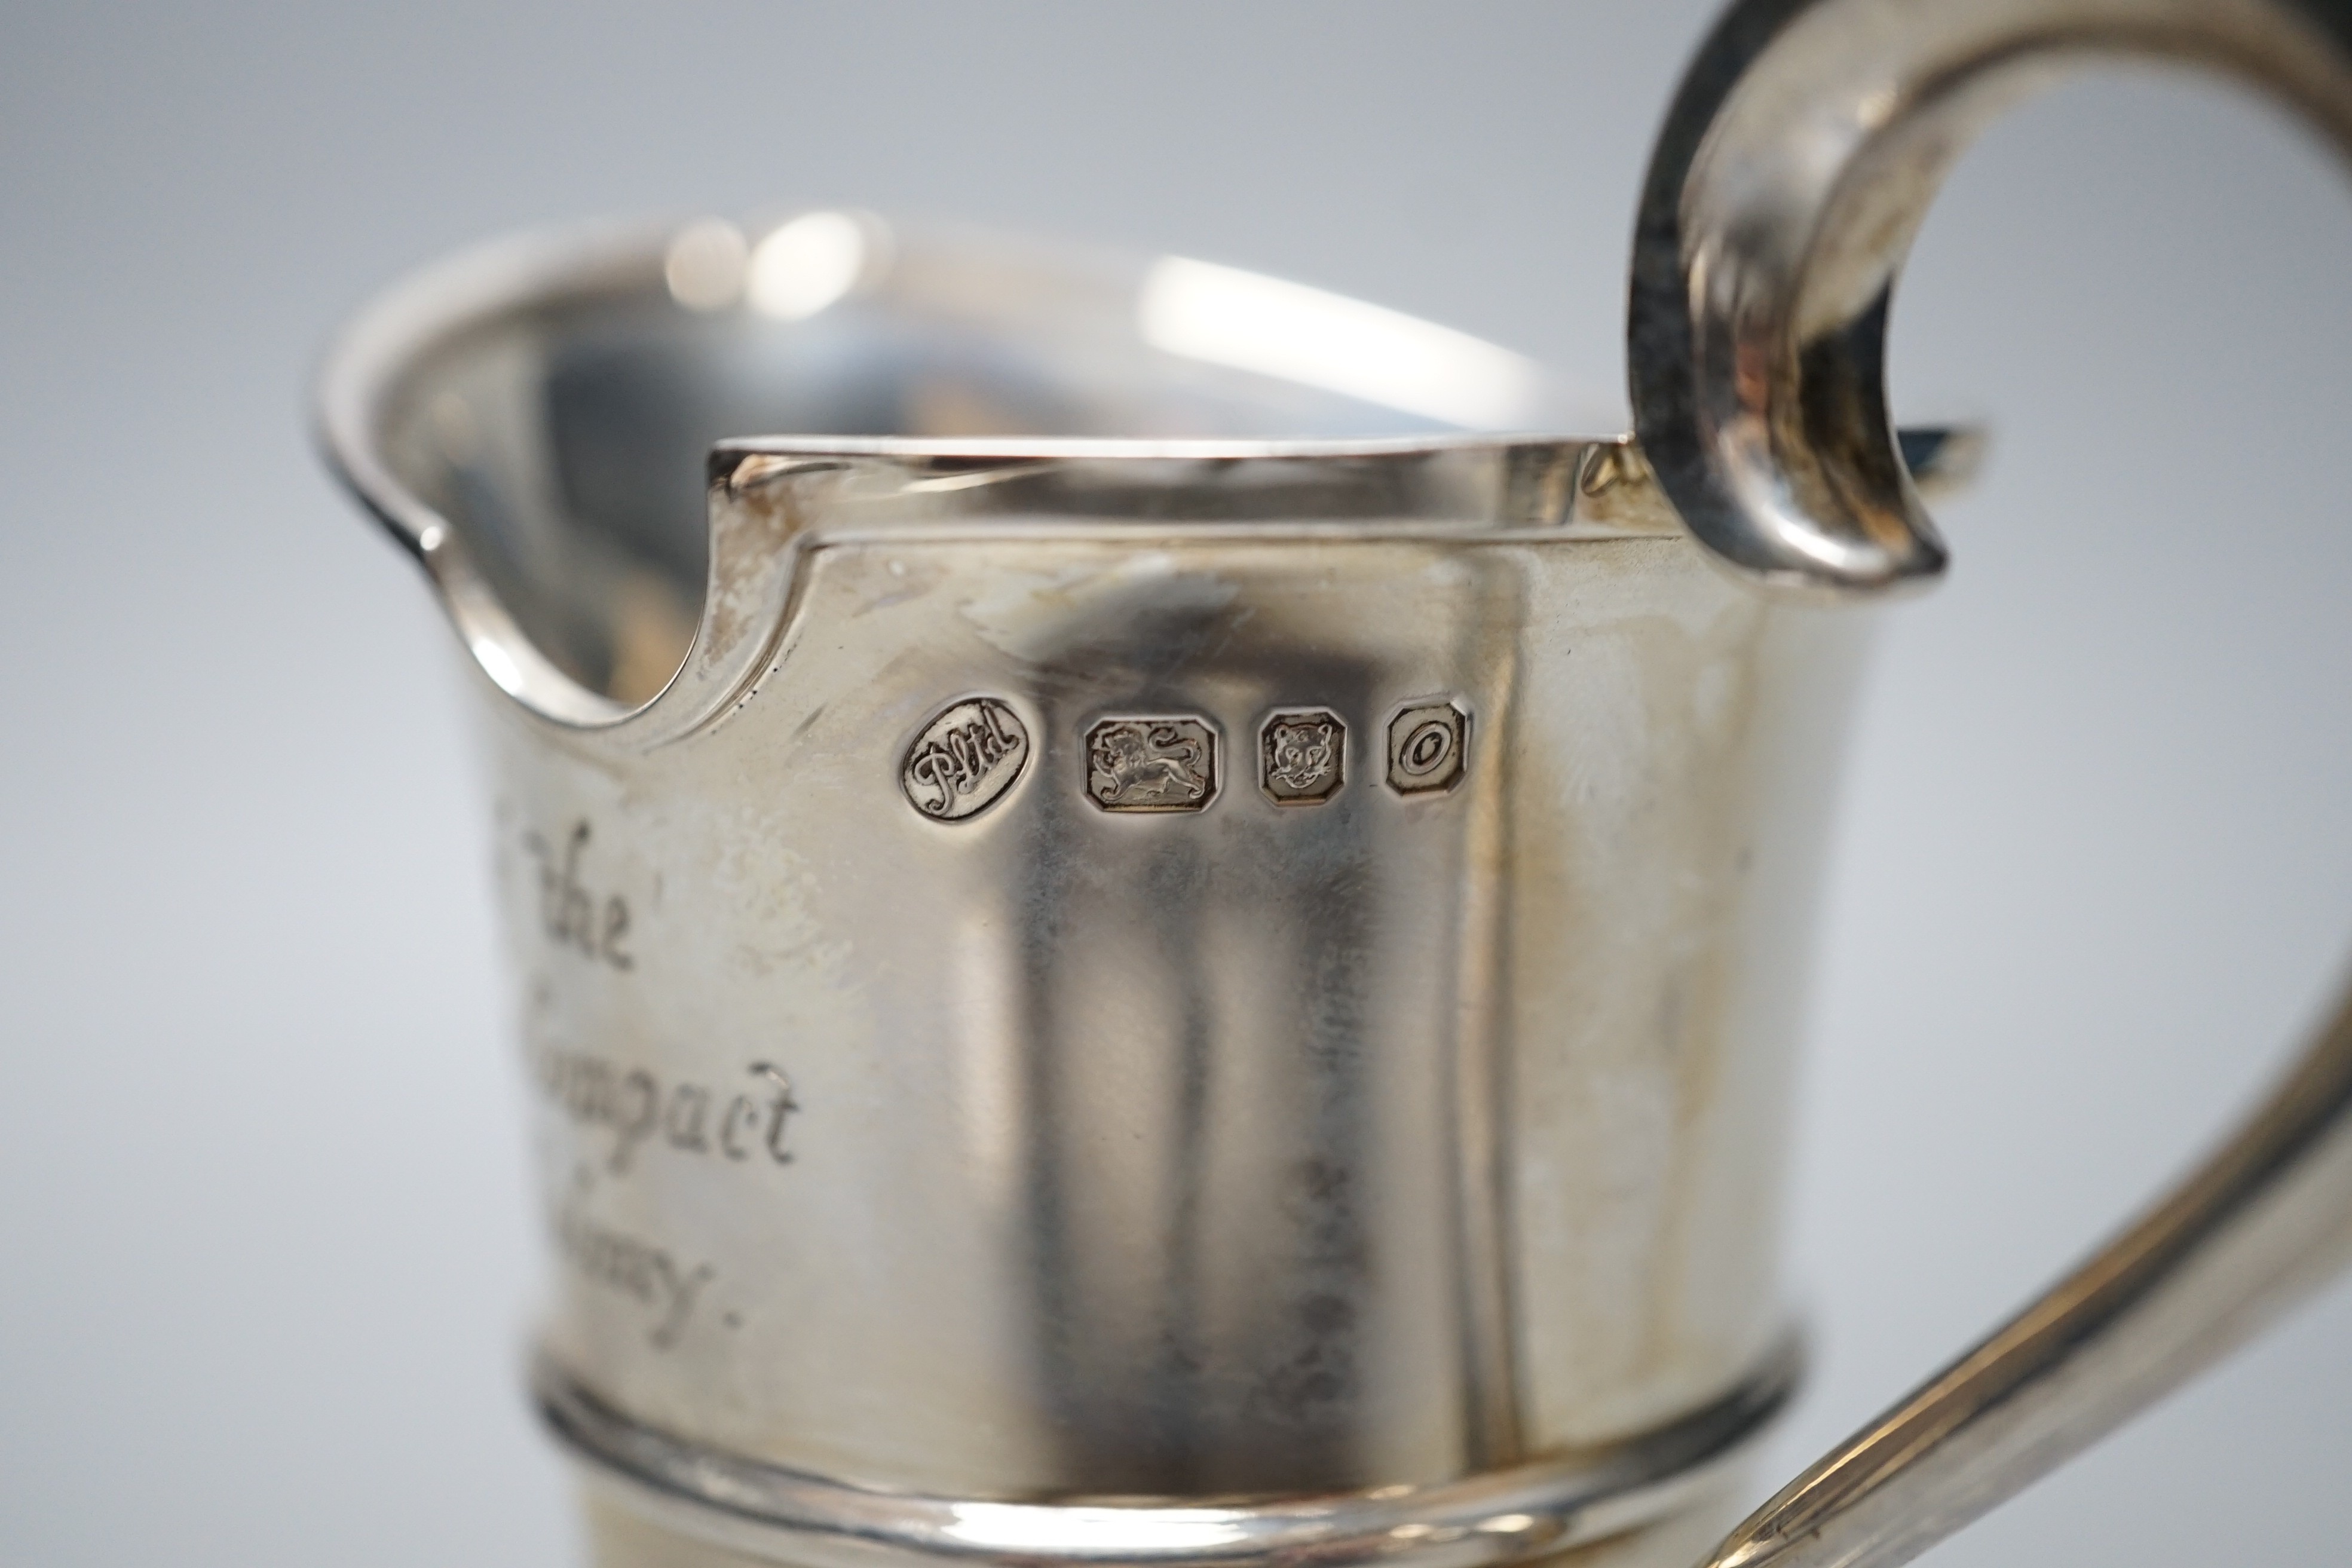 A modern limited edition silver cream jug, commemorating the 350th Anniversary of the sailing of the Mayflower, P Ltd, London, 1969, 14.5cm, 7.2oz.